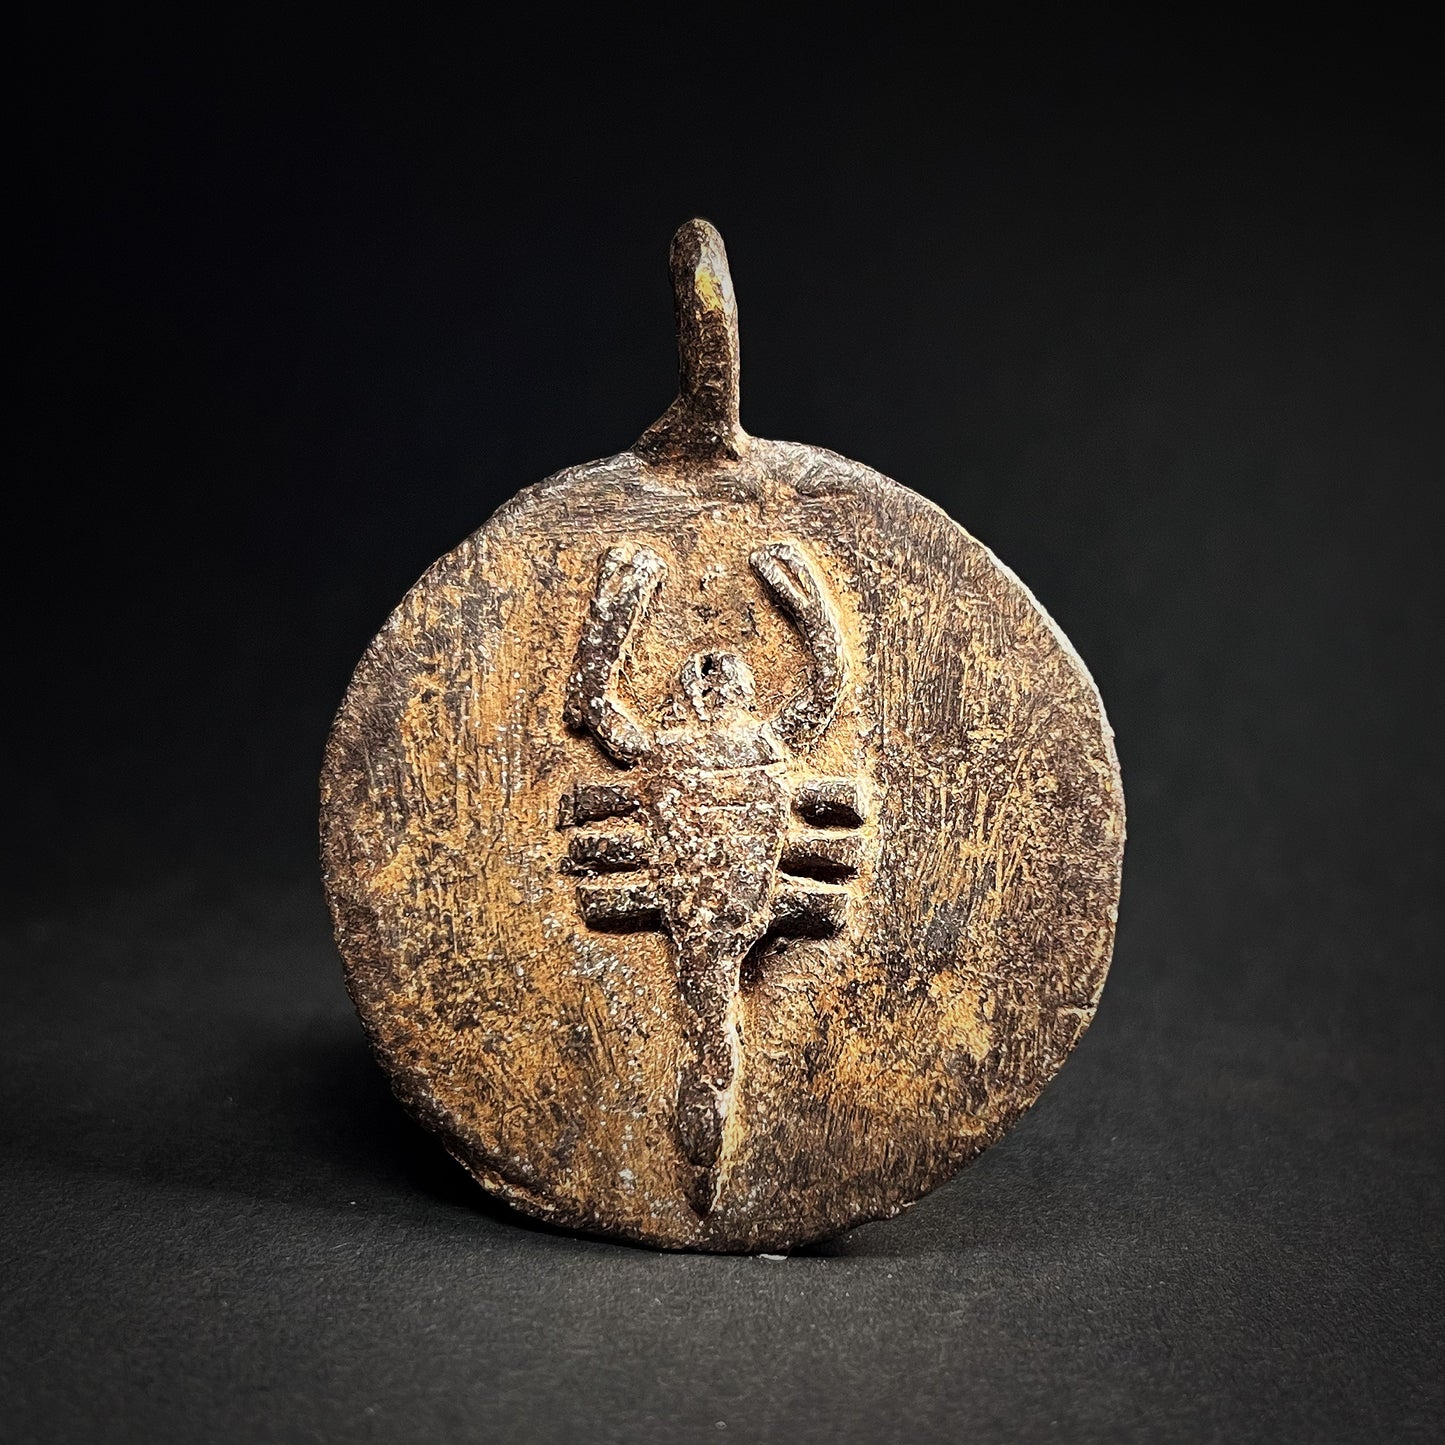 Scorpion amulet from Lori people made of bronze. A round amulet with scorpion image in center.